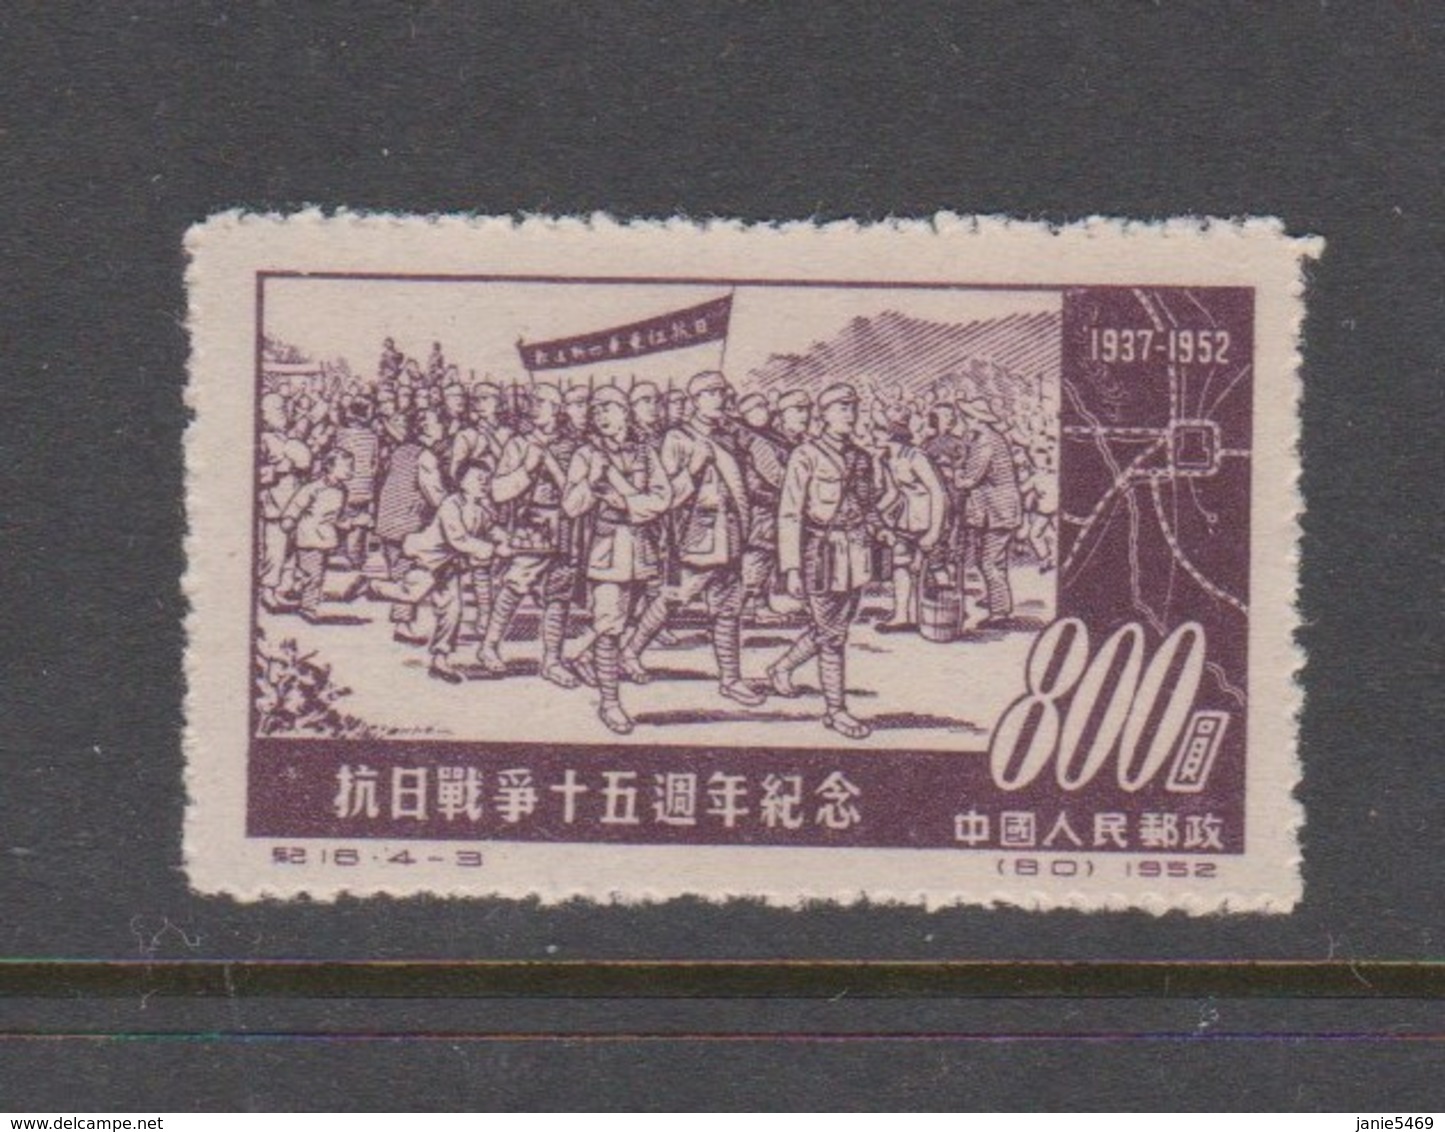 China People's Republic SG 1559 1952 15th Anniversary Japan War, $ 800 Plum, Mint - Unused Stamps